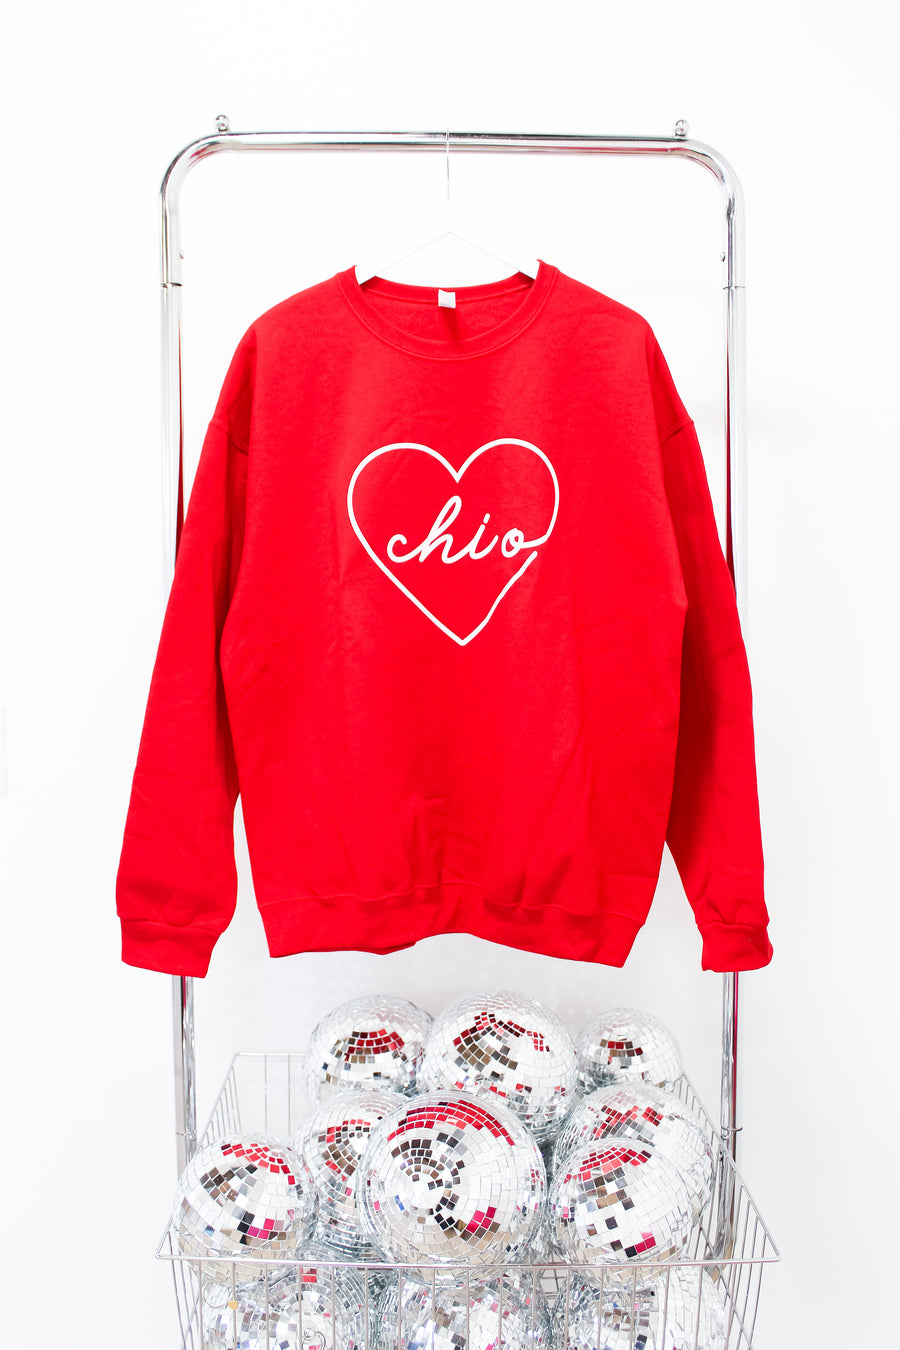 Chi Omega Crew - XL RED